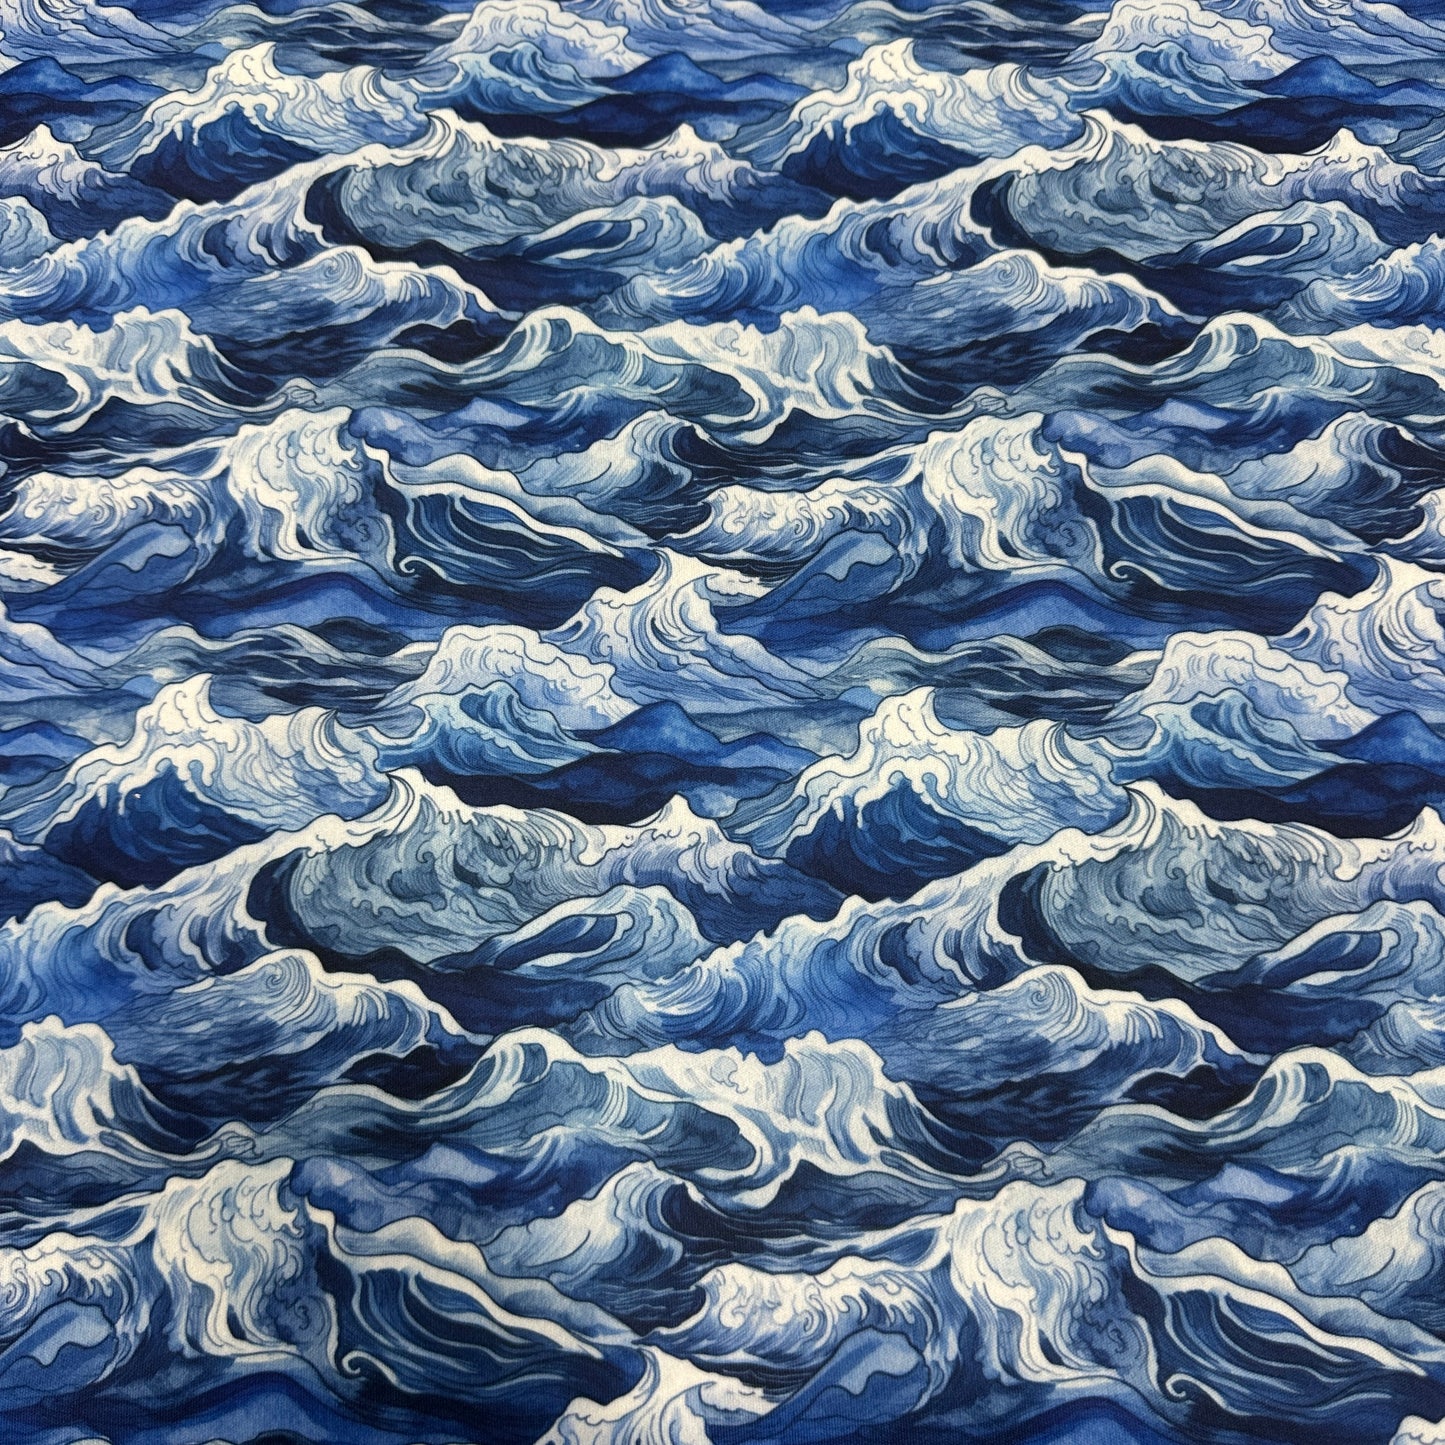 Royal Waves 1 mil PUL Fabric - Made in the USA